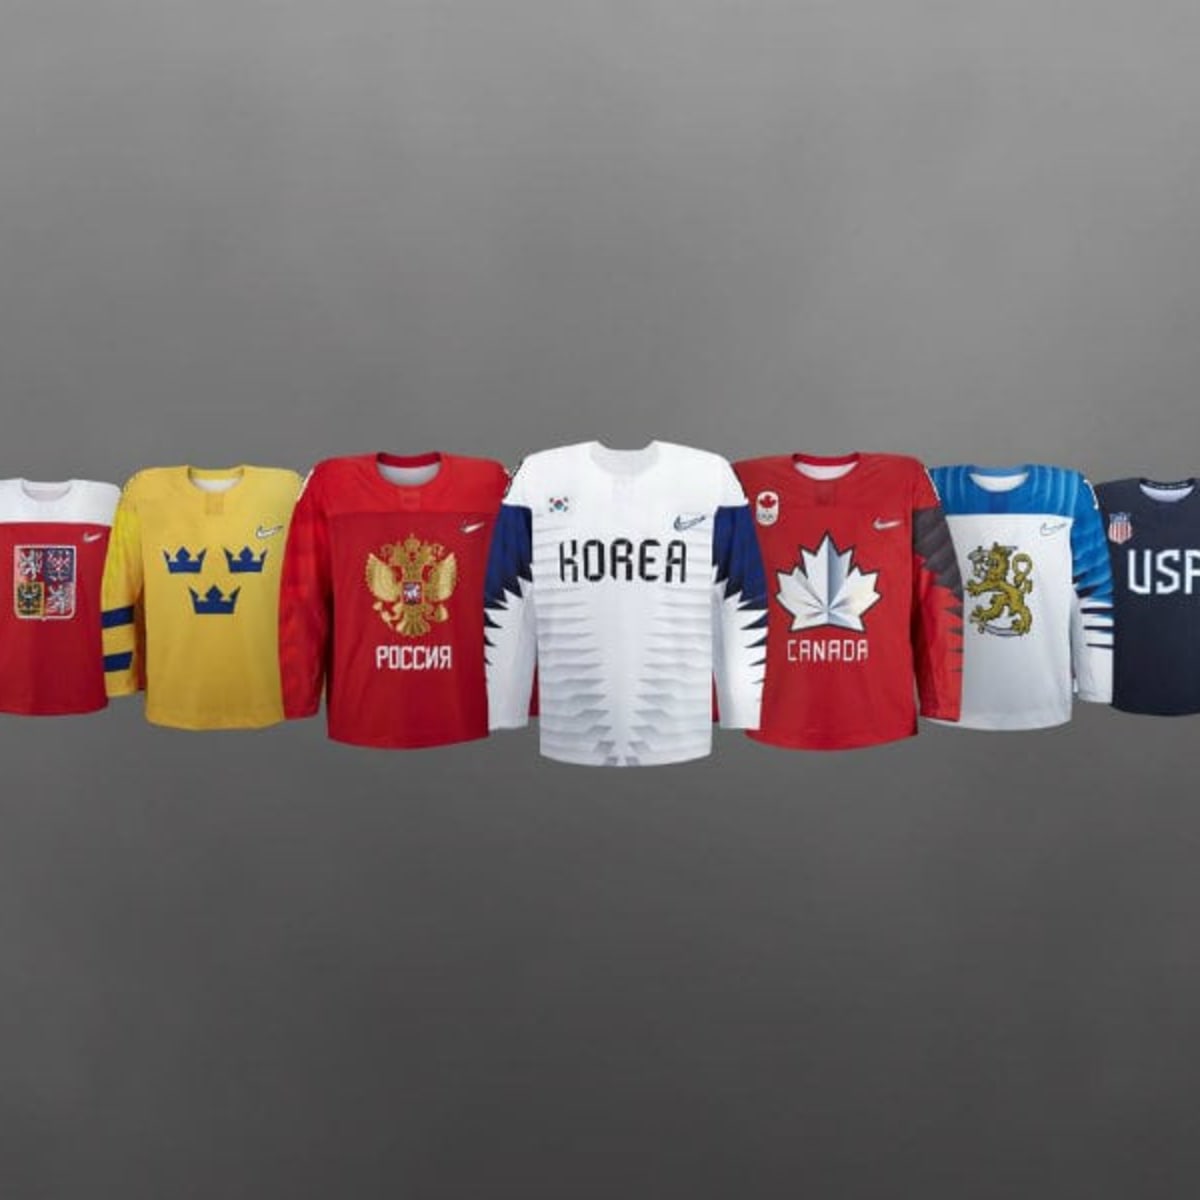 Nike unveils jerseys for 2018 Olympics — who will look best in Pyeongchang?  - The Hockey News